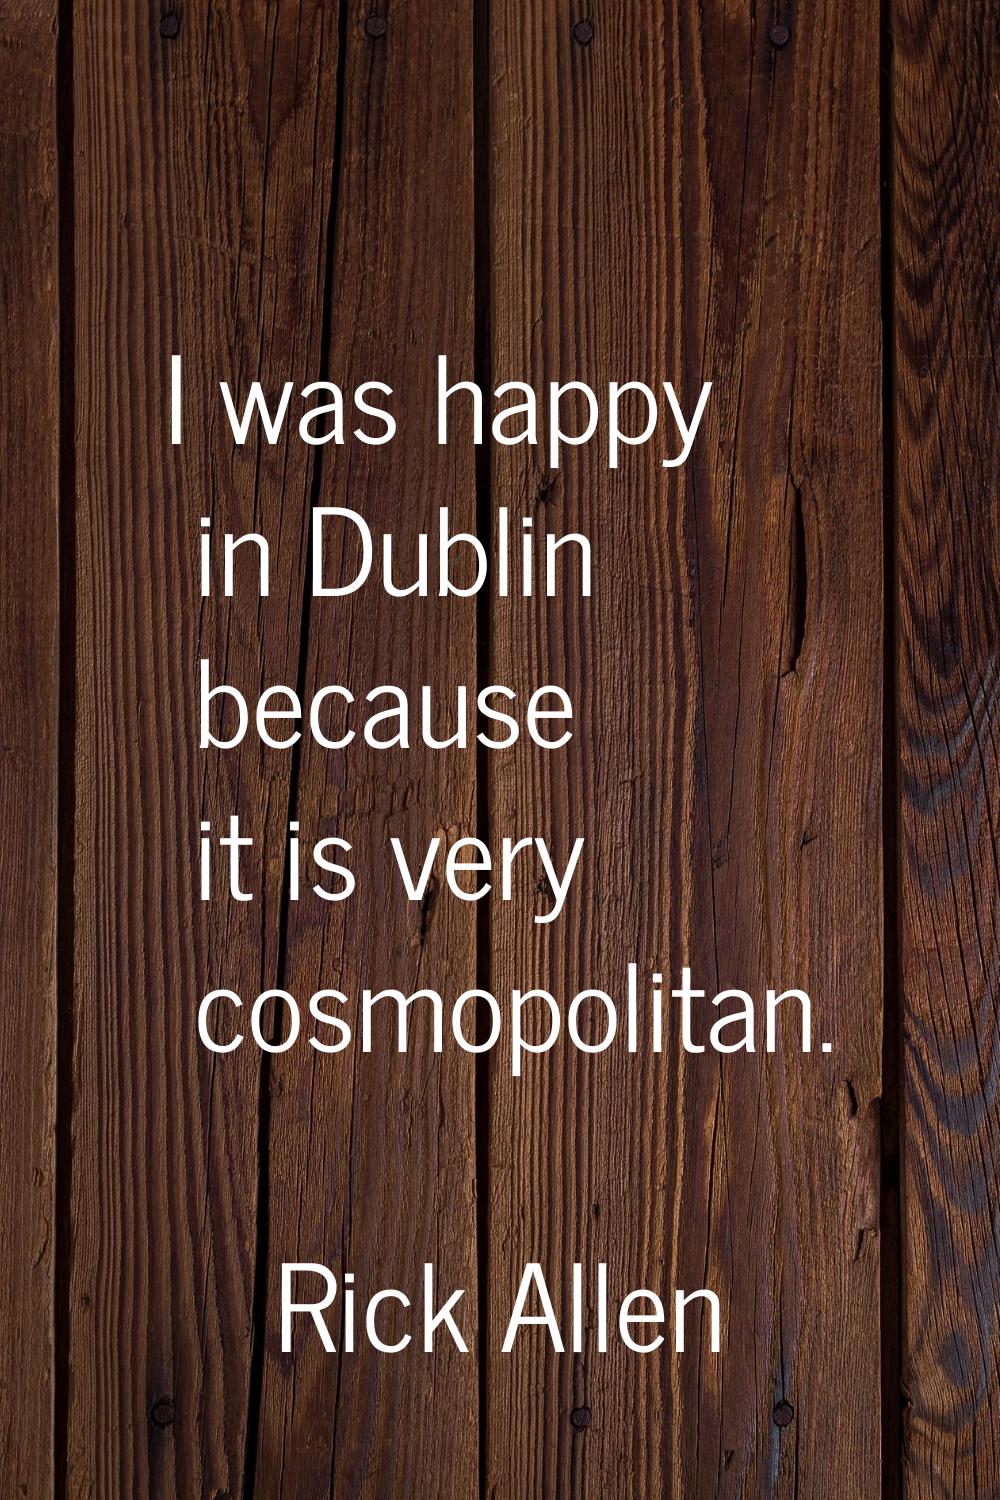 I was happy in Dublin because it is very cosmopolitan.